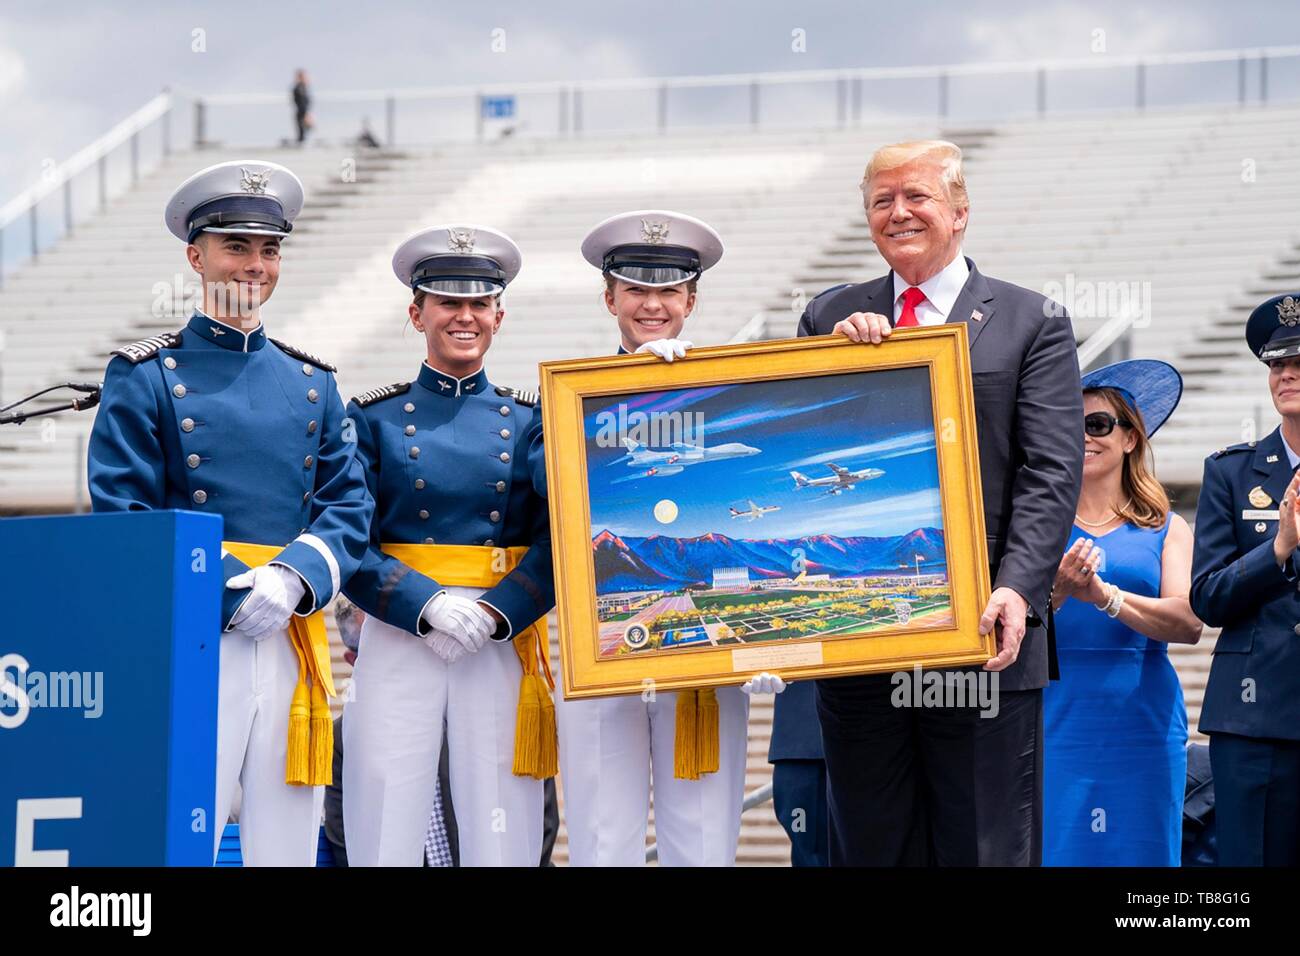 U.S President Donald Trump is presented with a painting by cadets during the U.S. Air Force Academy Graduation Ceremony at the USAF Academy Falcon Stadium May 30, 2019 in Colorado Springs, Colorado. Credit: Planetpix/Alamy Live News Stock Photo